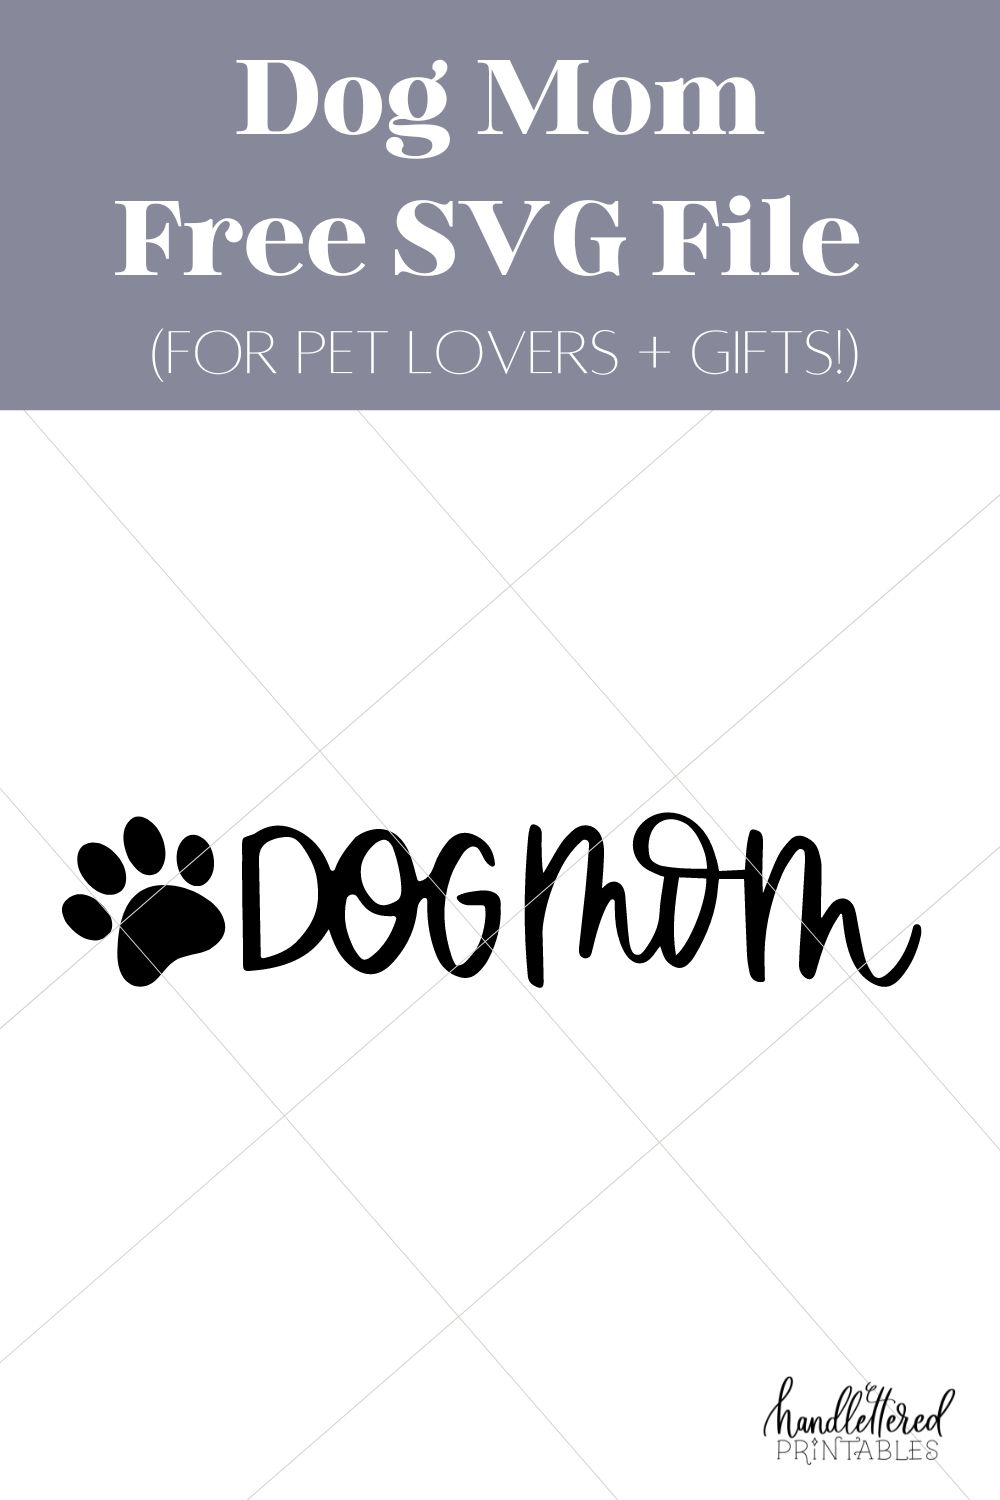 Dog Mom free SVG file shown with title text